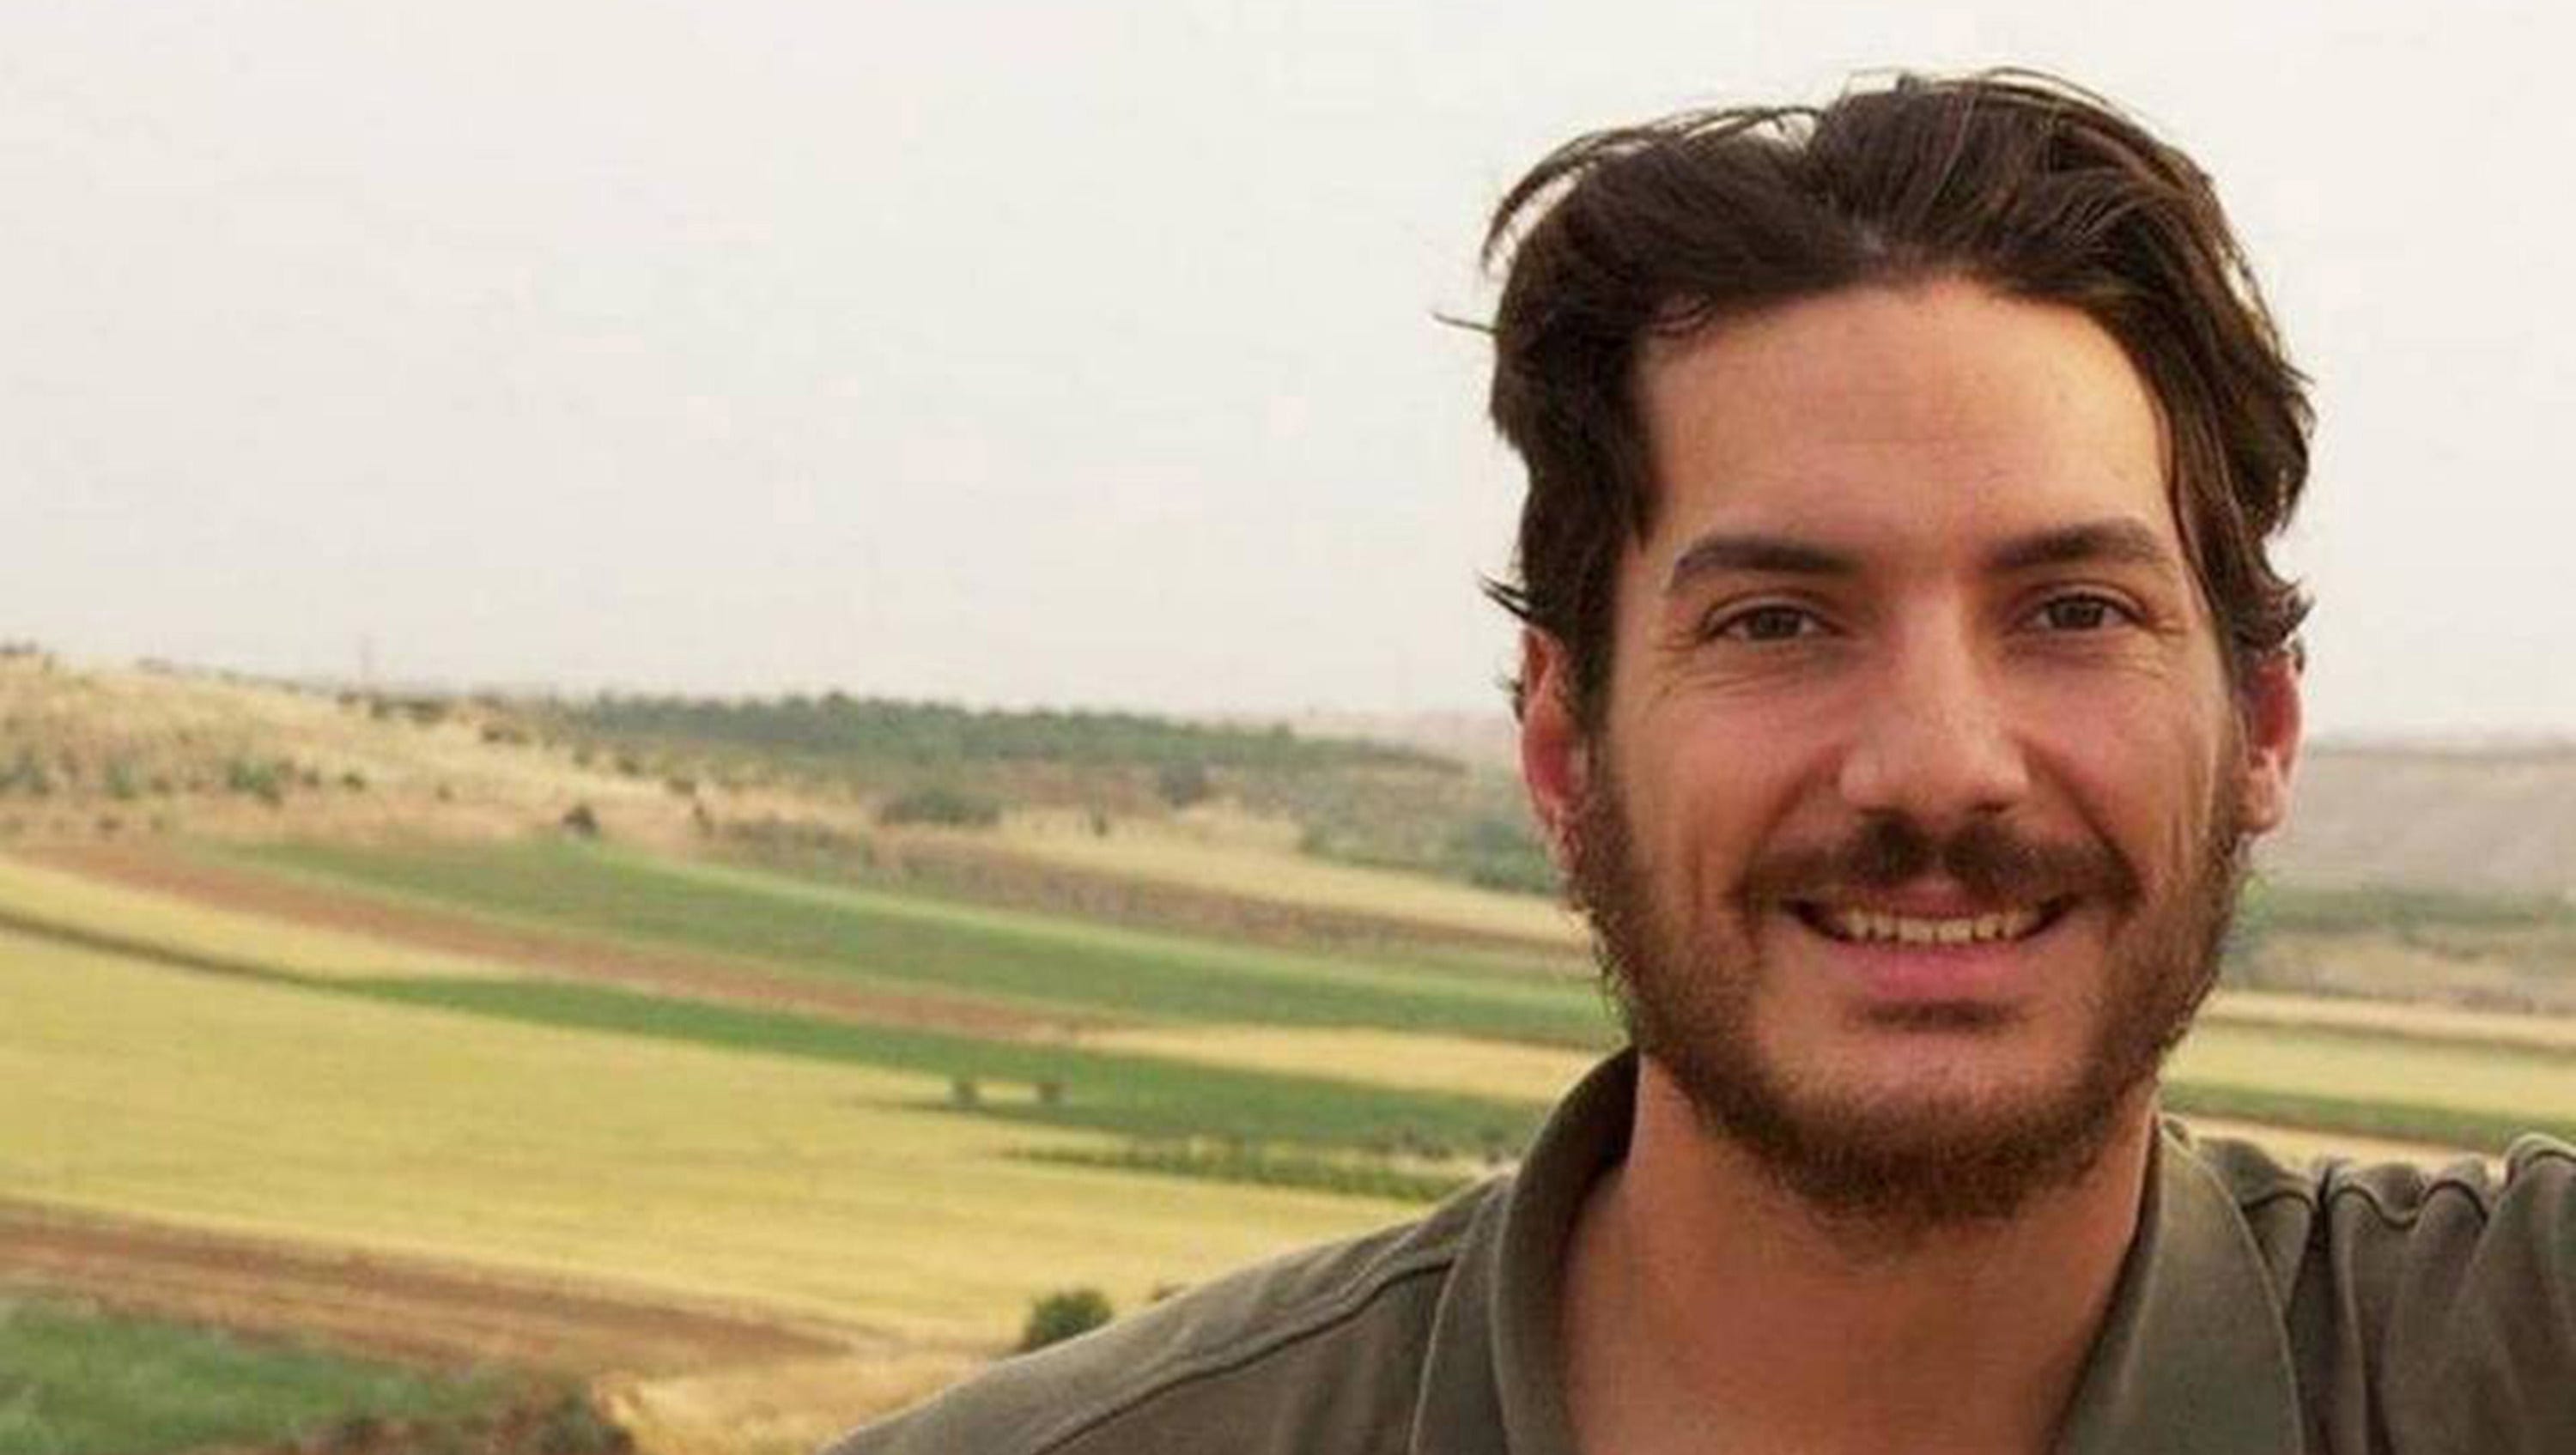 President Biden, where is the action for Austin Tice?